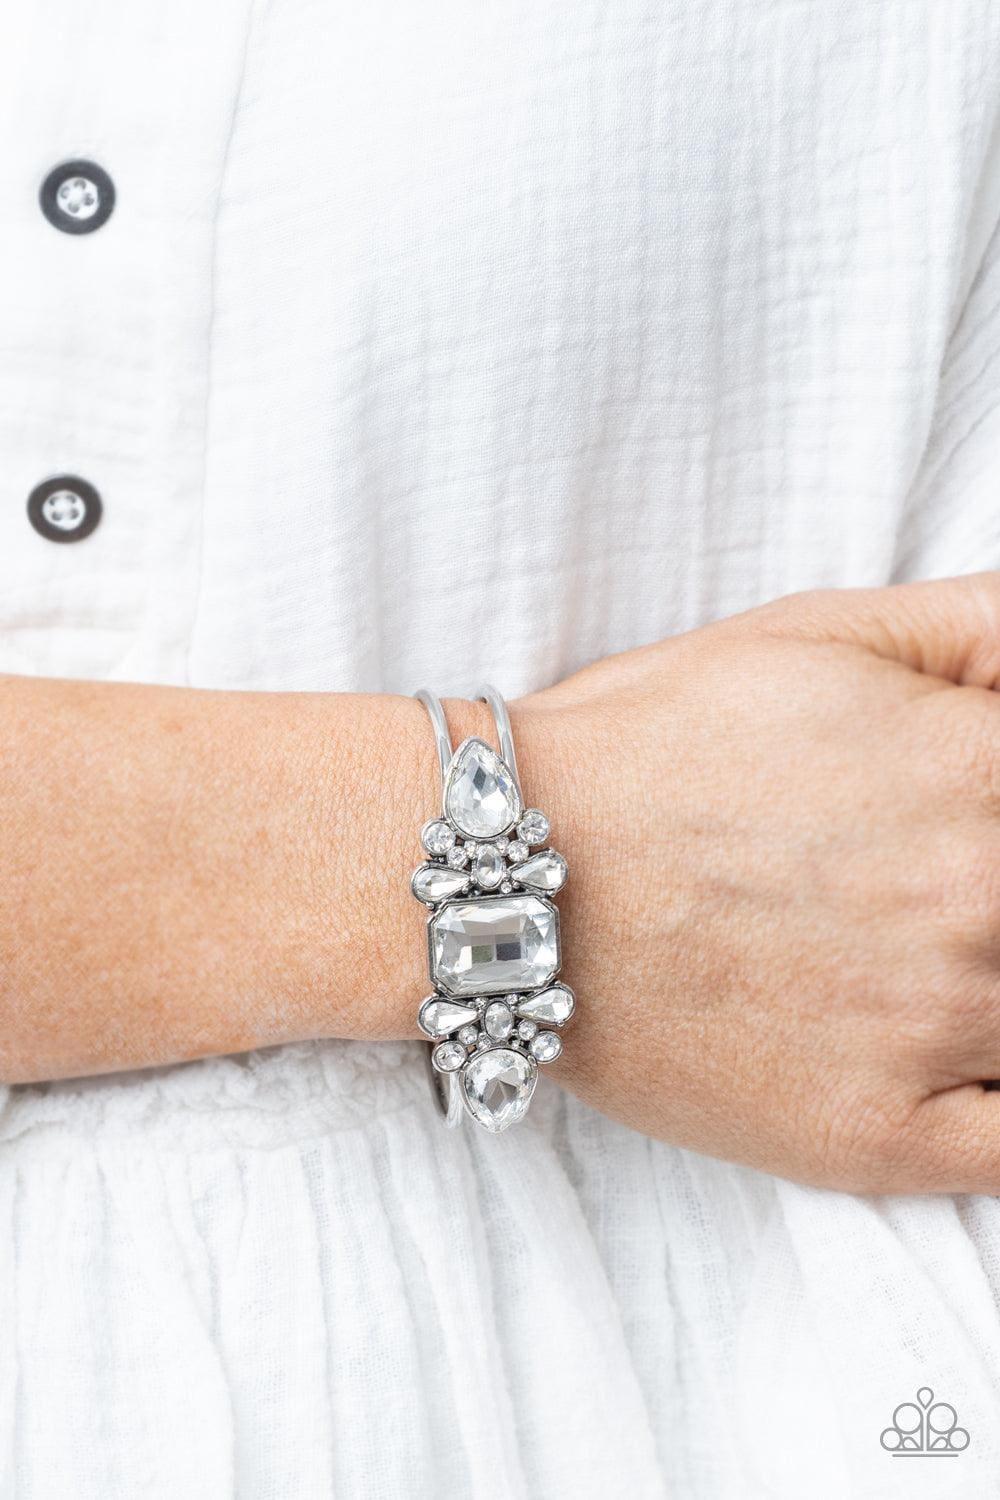 Paparazzi Accessories - Call Me Old-fashioned – White Bracelet - Bling by JessieK